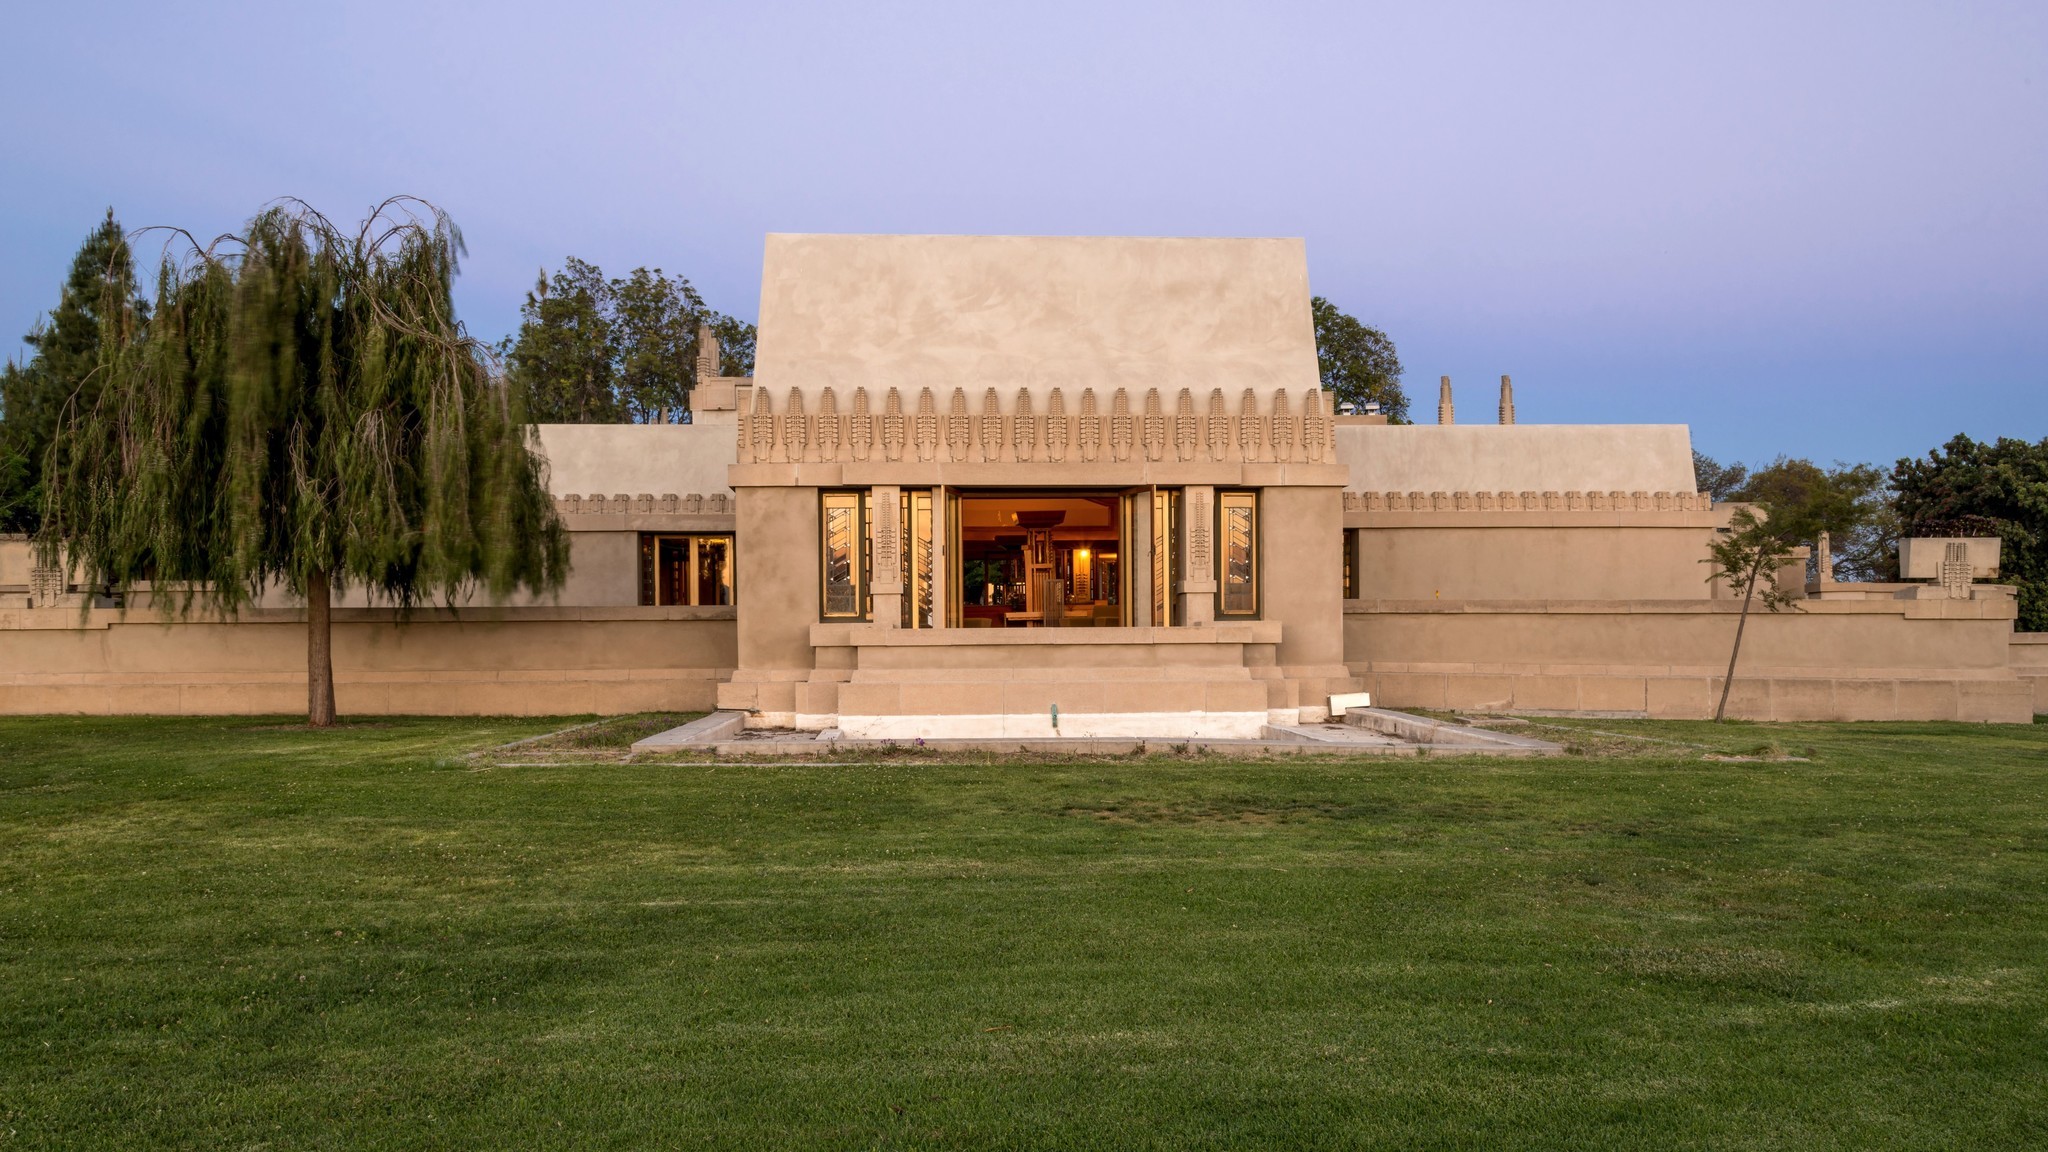 Hollyhock House, Wright's first work in Los Angeles, is now part of Barnsdall Art Park. Tours are offered as part of Friday night wine tastings this summer.